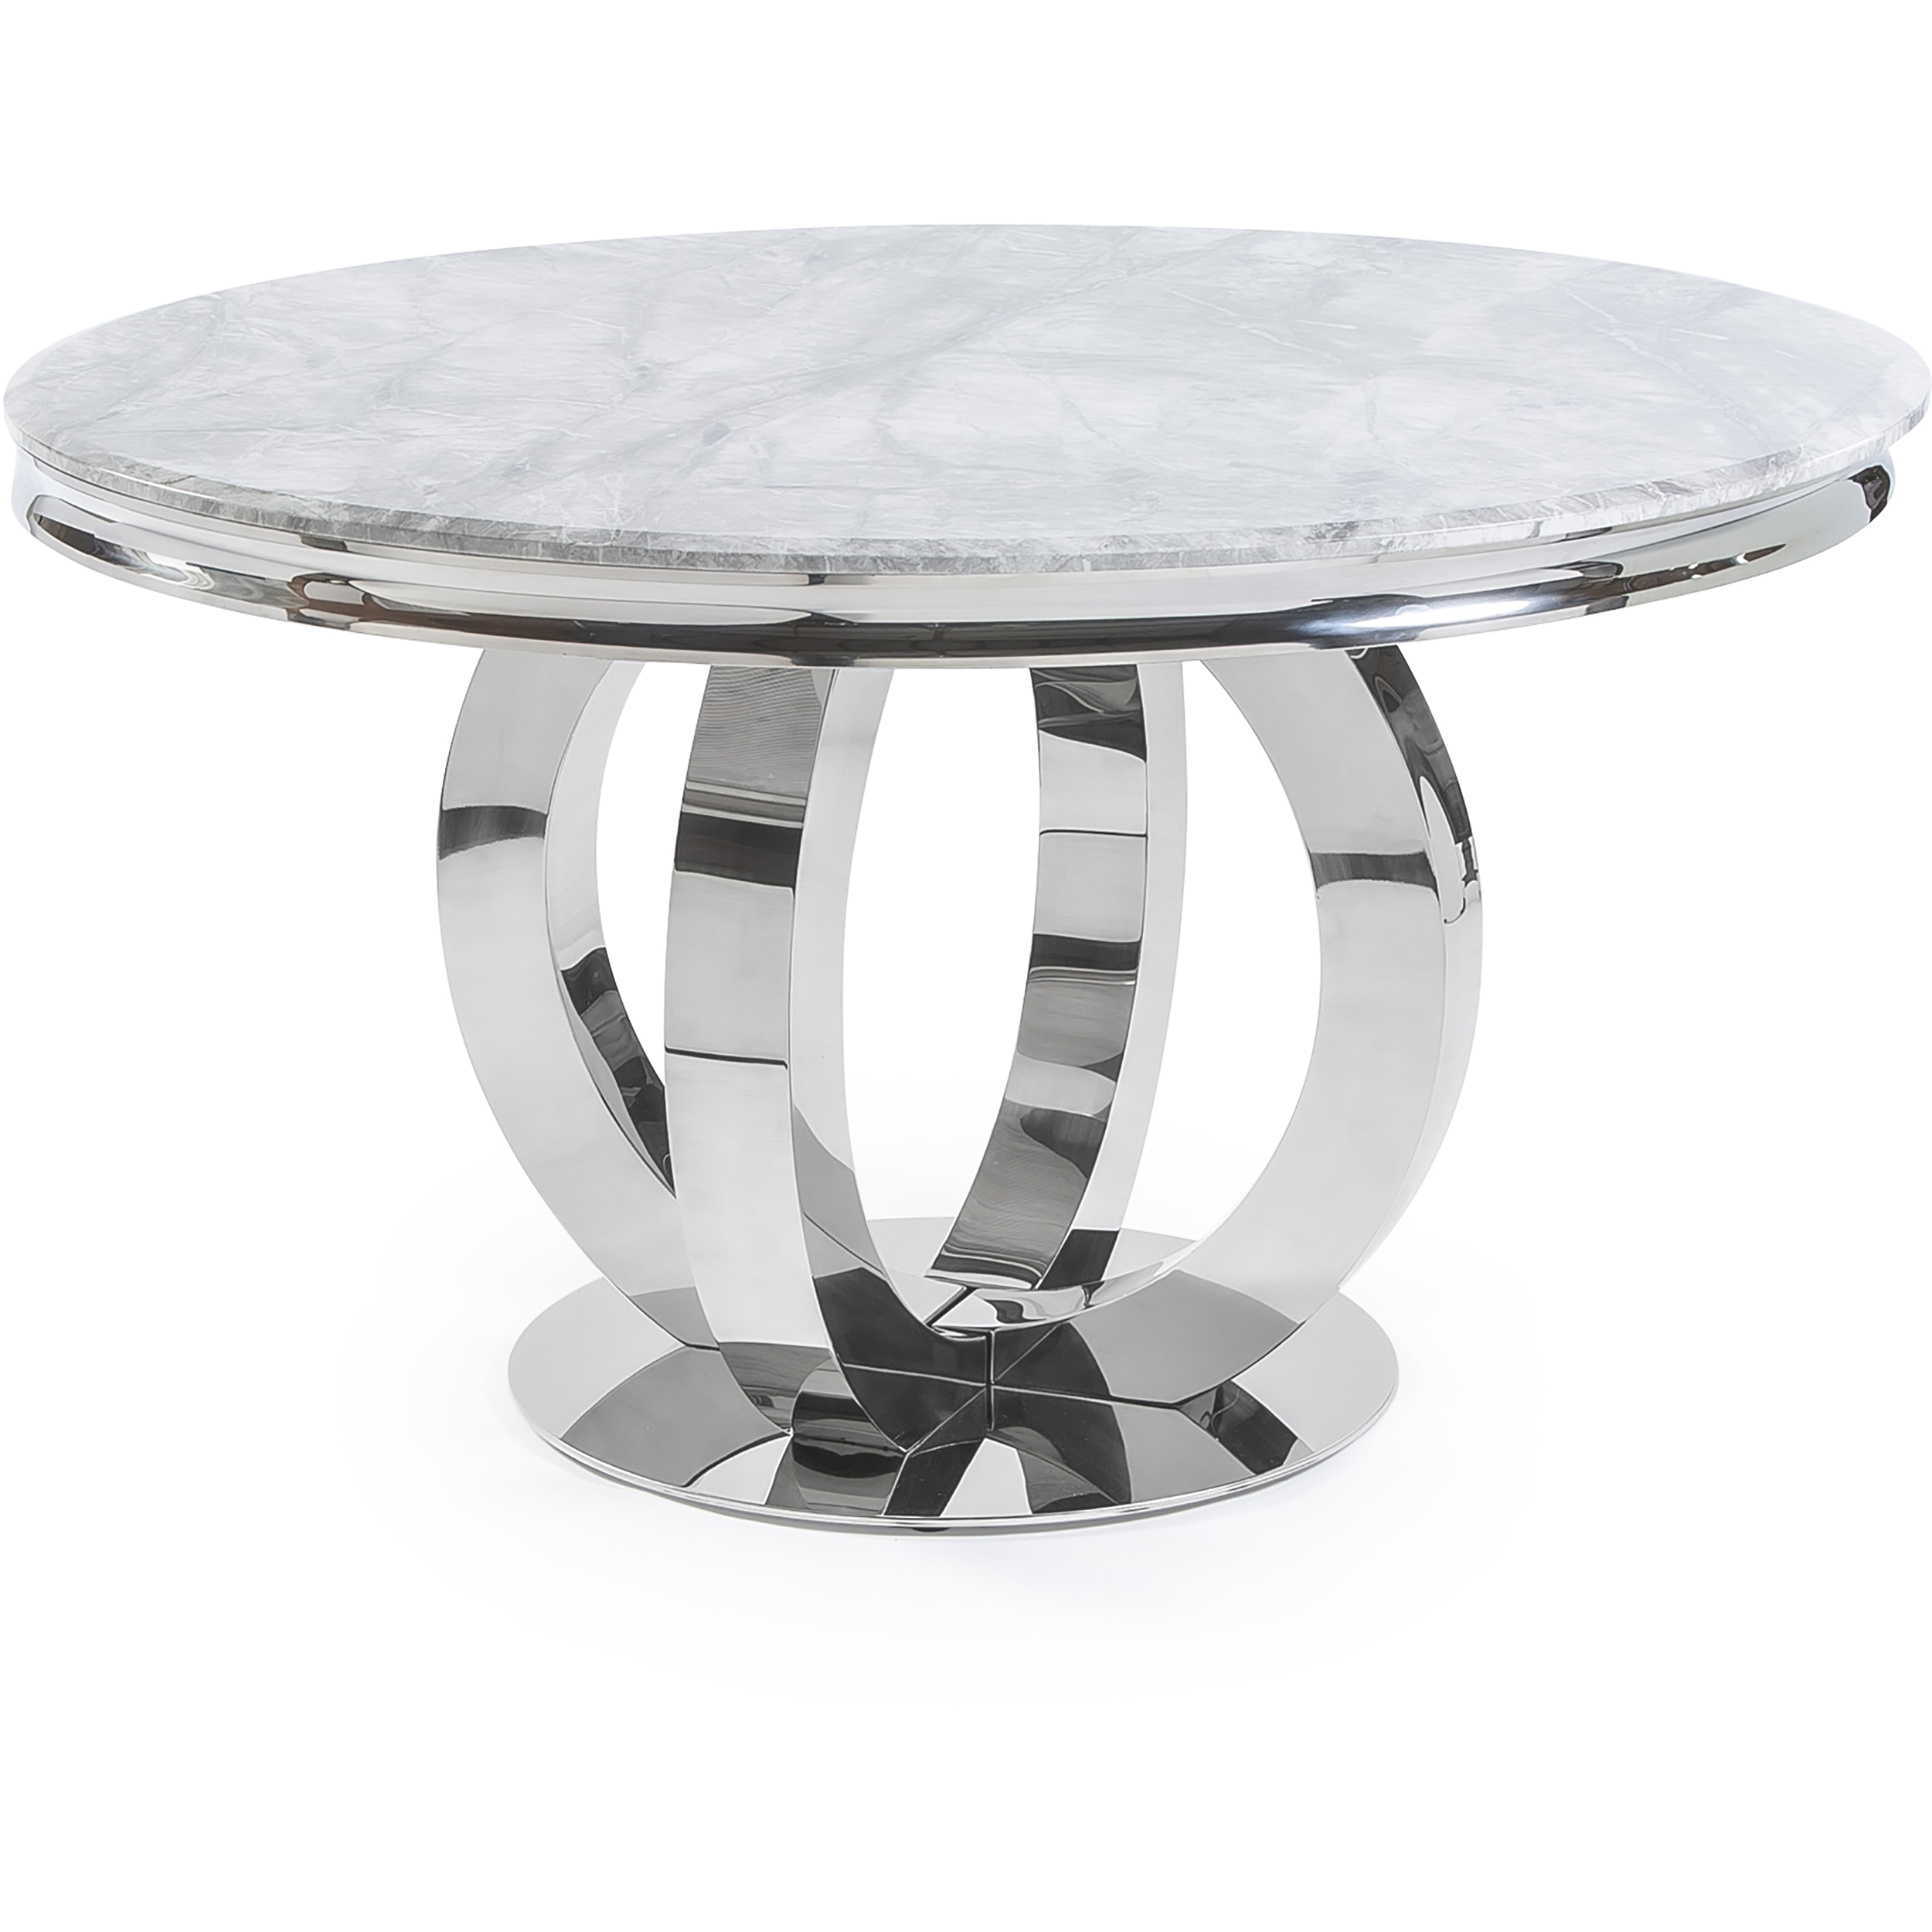 13m Circular Grey Marble Stainless Steel Dining Table Grosvenor Furniture